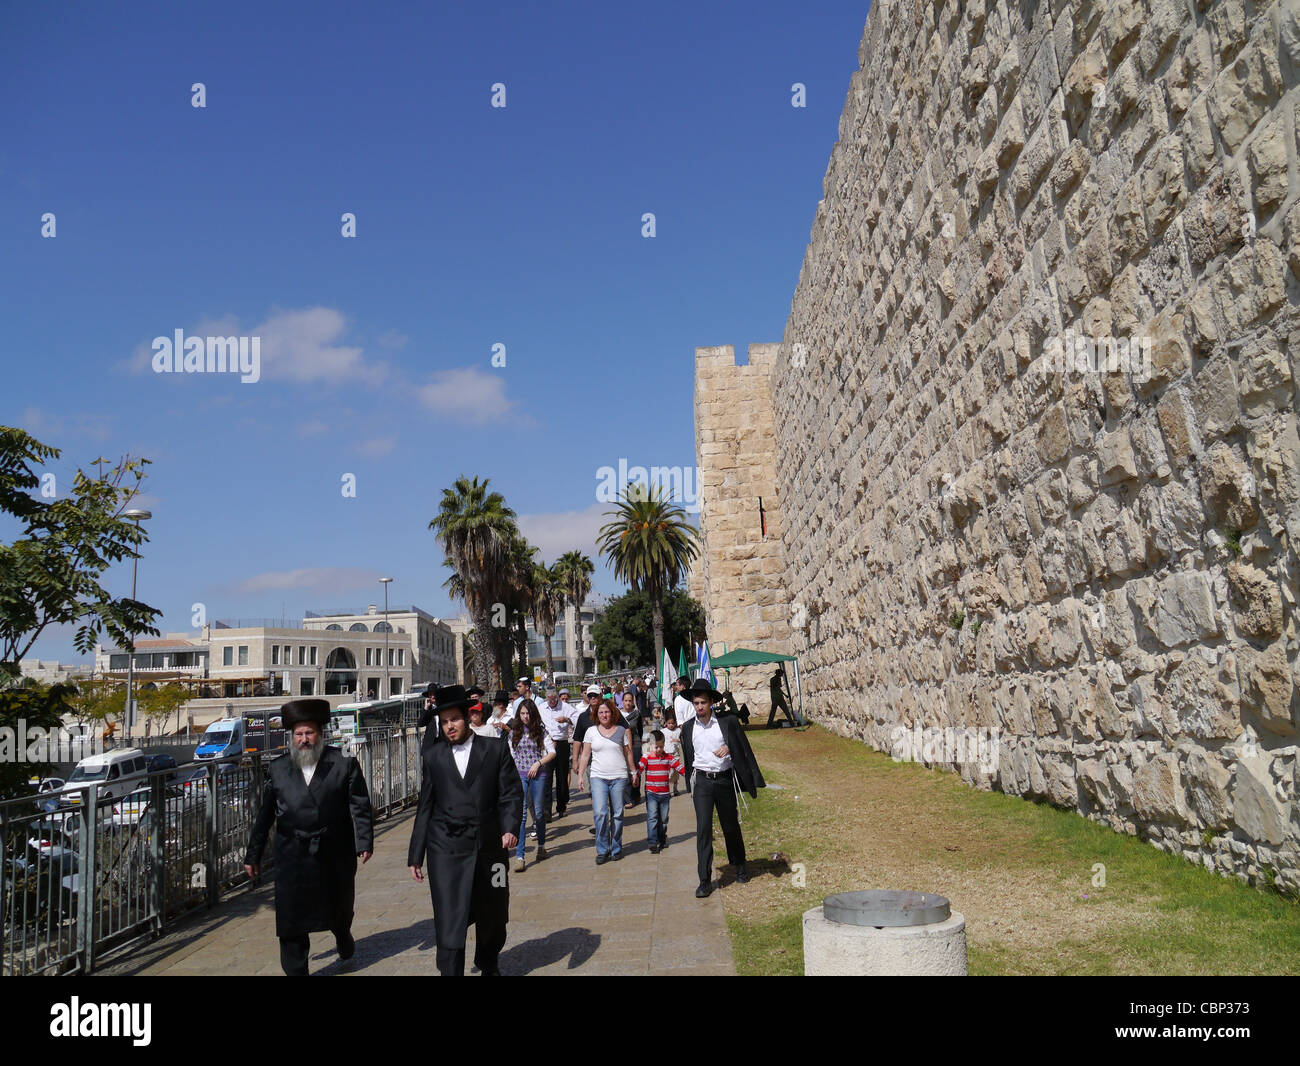 Religious Jews walking beside exterior walls of the Old City of Jerusalem near Jaffa Gate Stock Photo